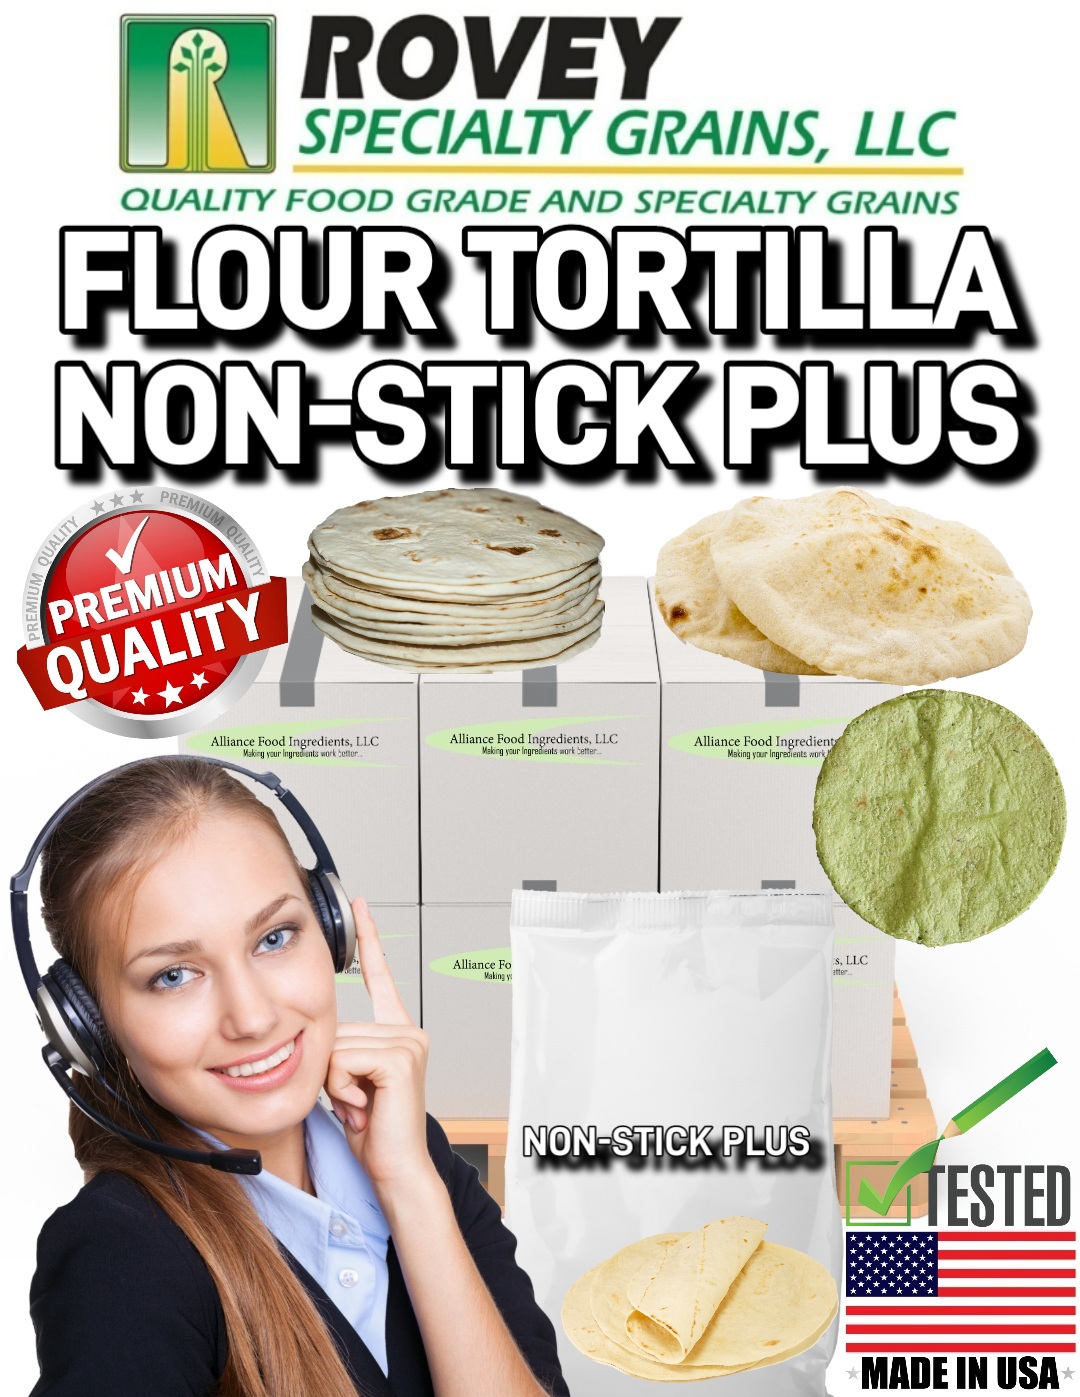 NON-STICK PLUS is flour tortilla formula made by Alliance food ingredients to help prevent flour tortillas from sticking together in the summer in stock for immediate shipping. Call Rovey Specialty Grains, LLC. at 217-227-4541. Hablamos Español.  Rovey Specialty Grains. "Quality Ingredients, Quality Tortillas"